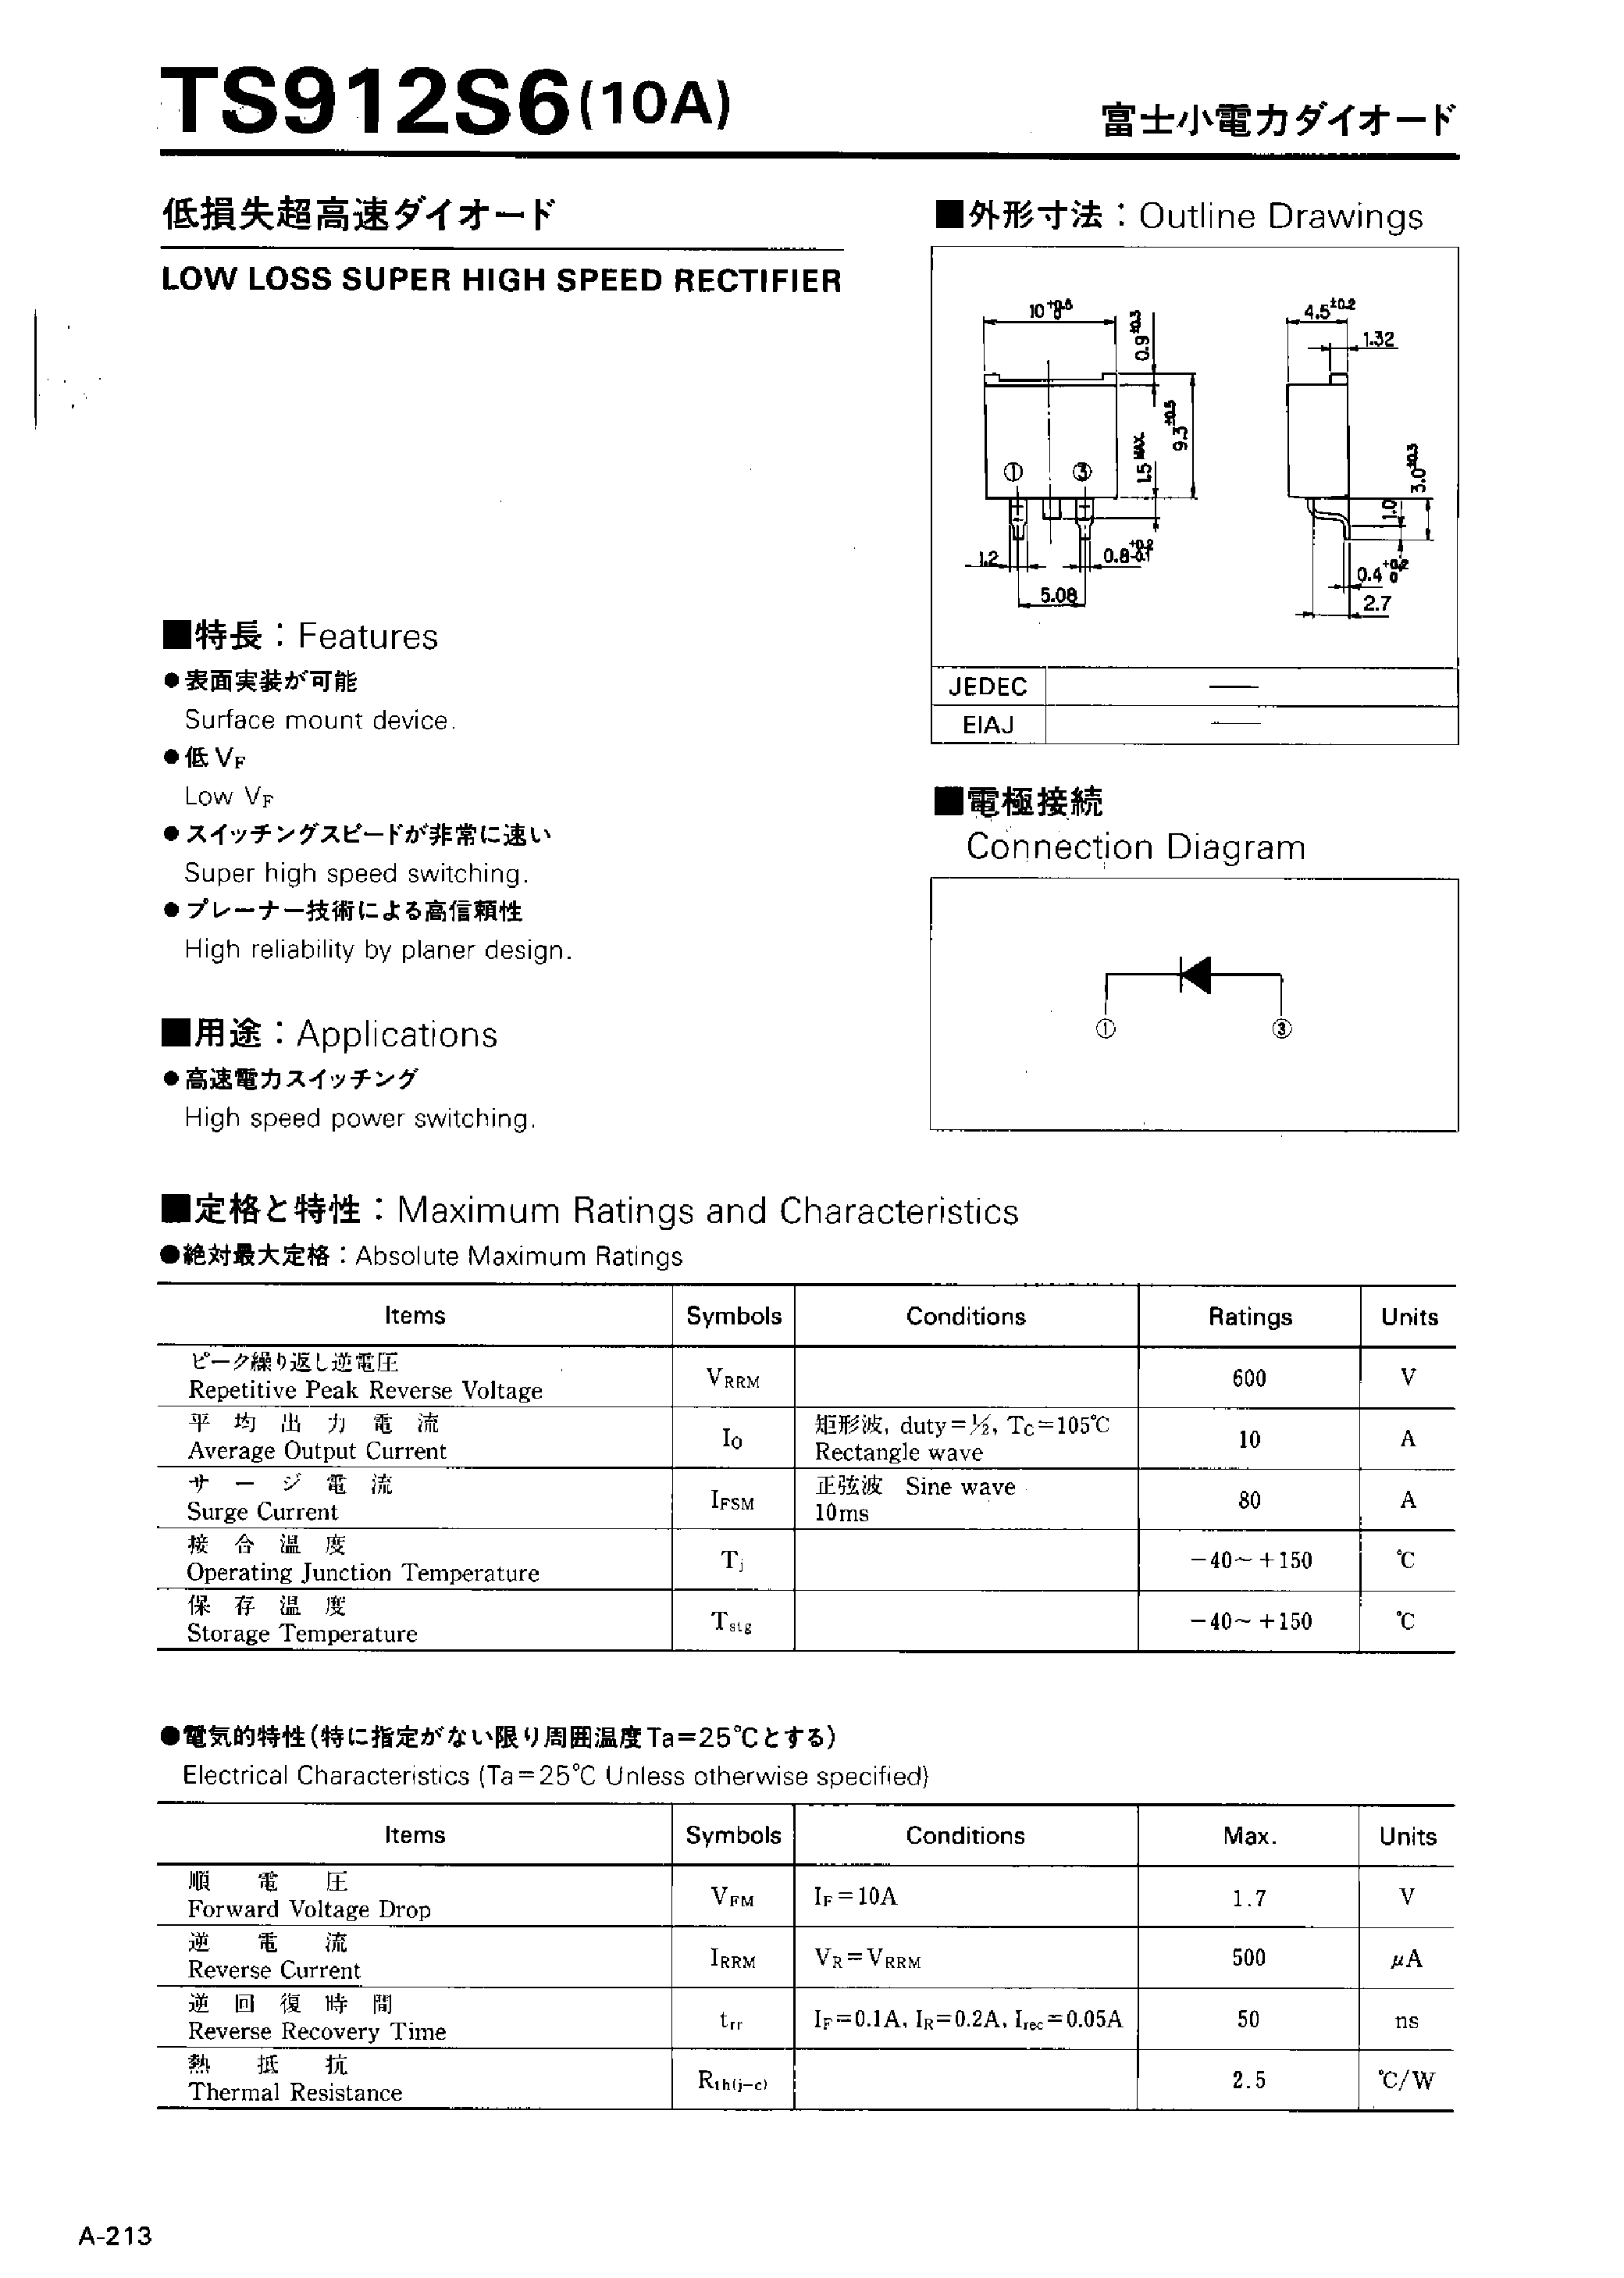 Datasheet TS912S6 - LOW LOSS SUPER HIGH SPEED RECTIFIER page 1